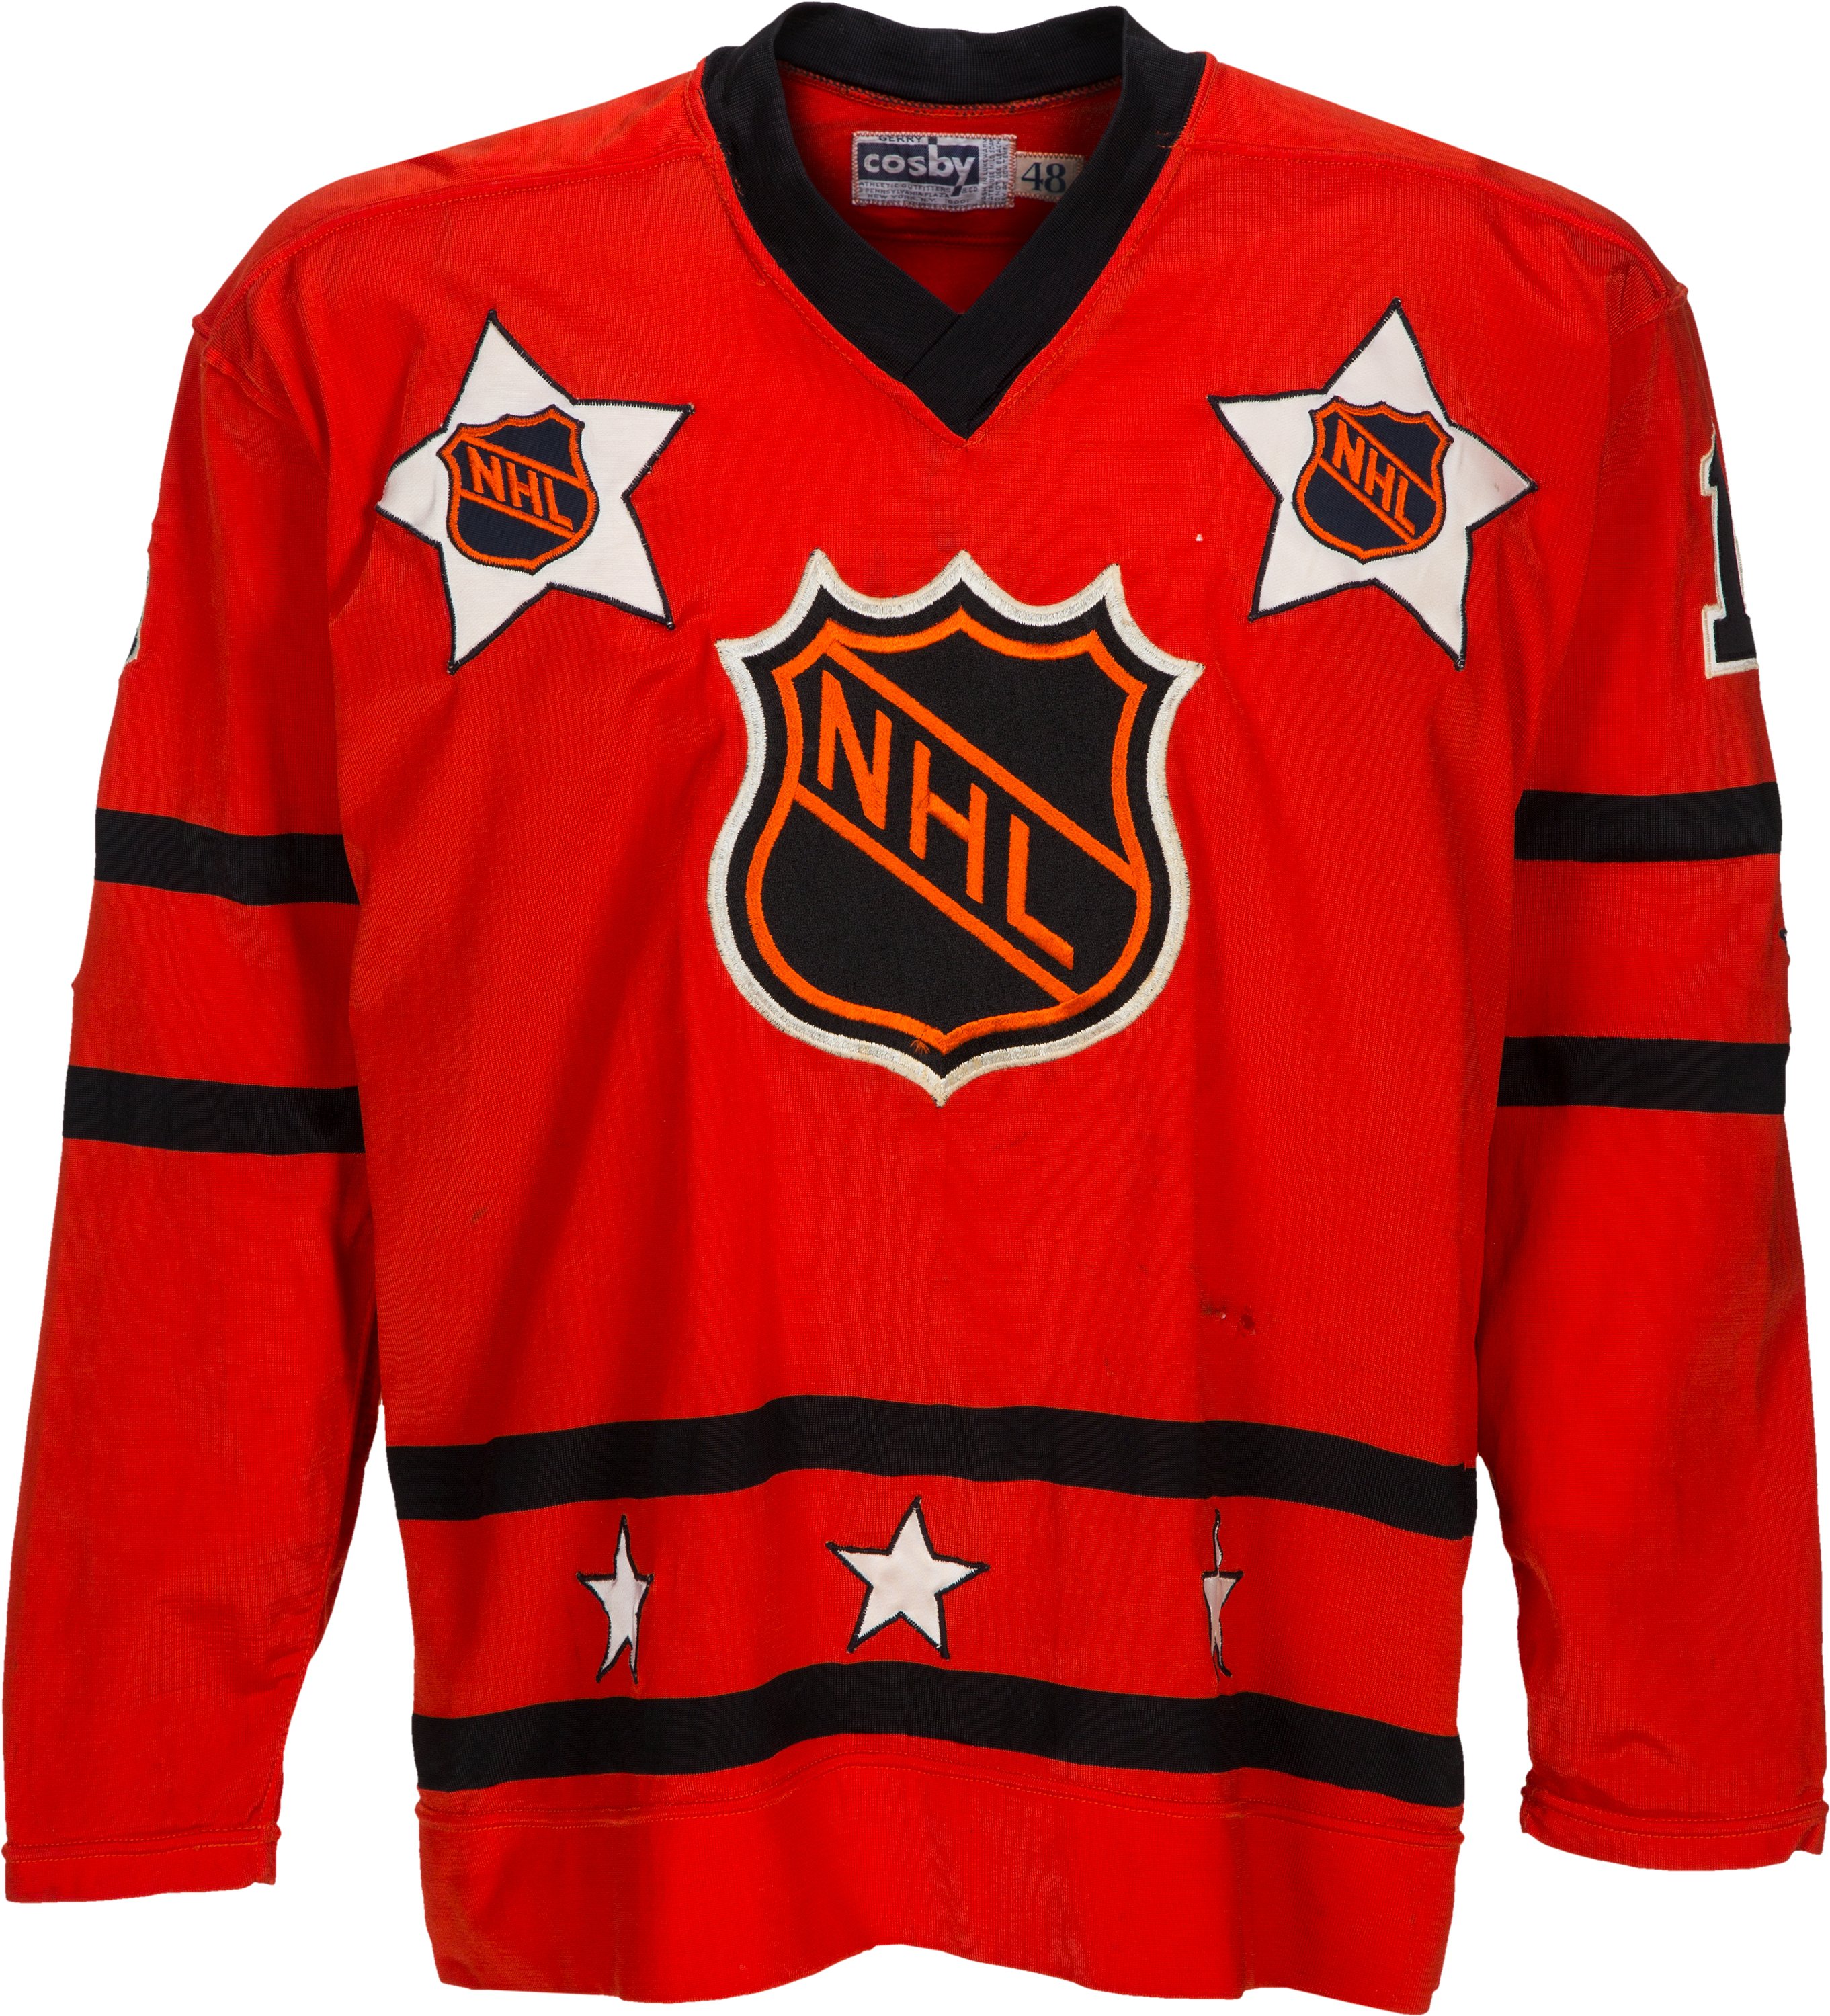 2014 nhl all star game jerseys Off 58% 